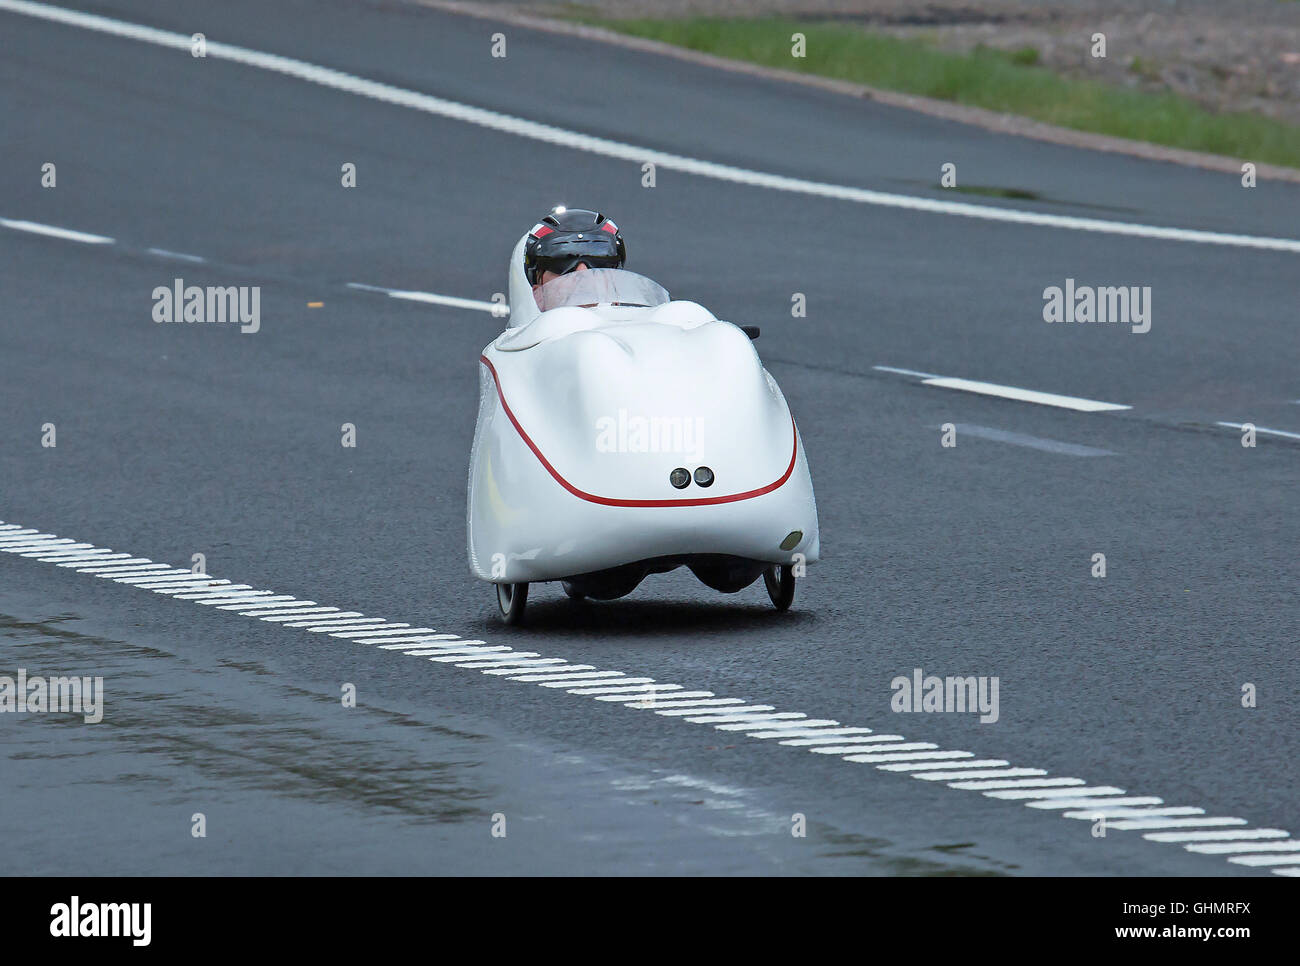 Velomobile, A man on a bike ride in an unusual vehicle. Stock Photo